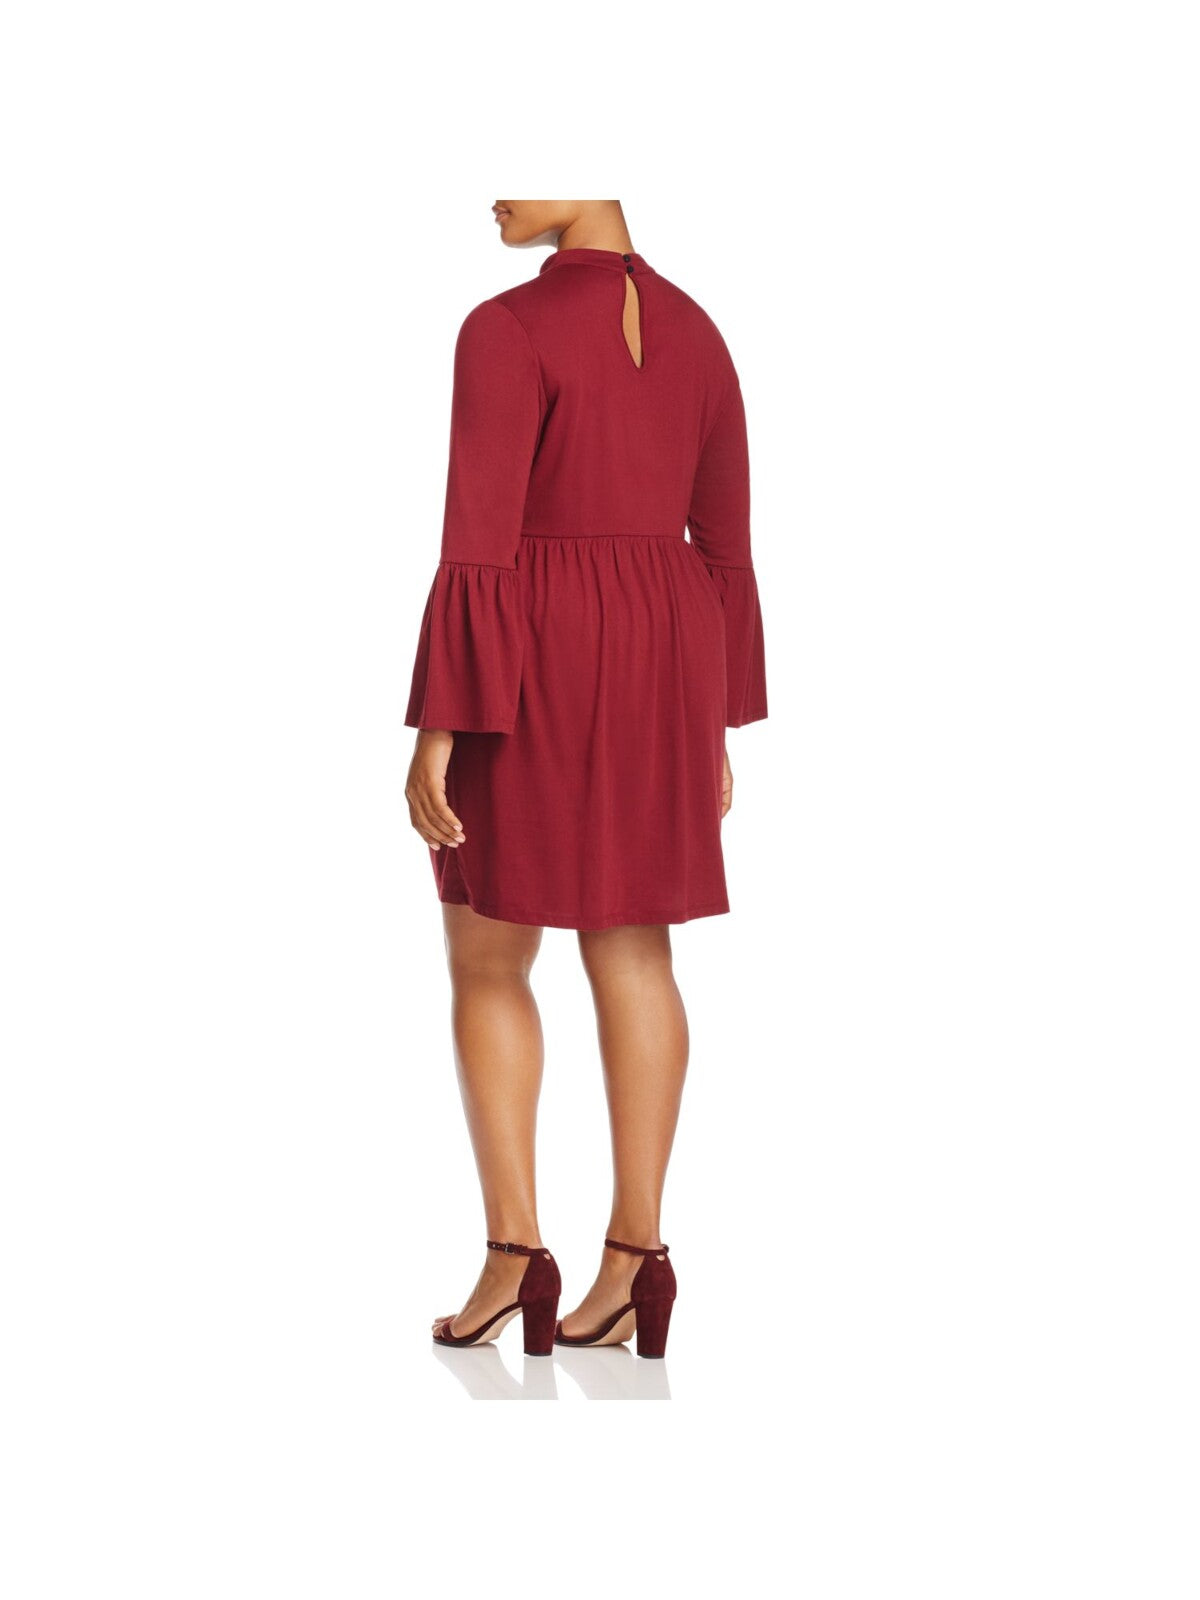 JUNAROSE Womens Burgundy Cut Out Bell Sleeve Mock Neck Above The Knee Cocktail Fit + Flare Dress Plus 0X